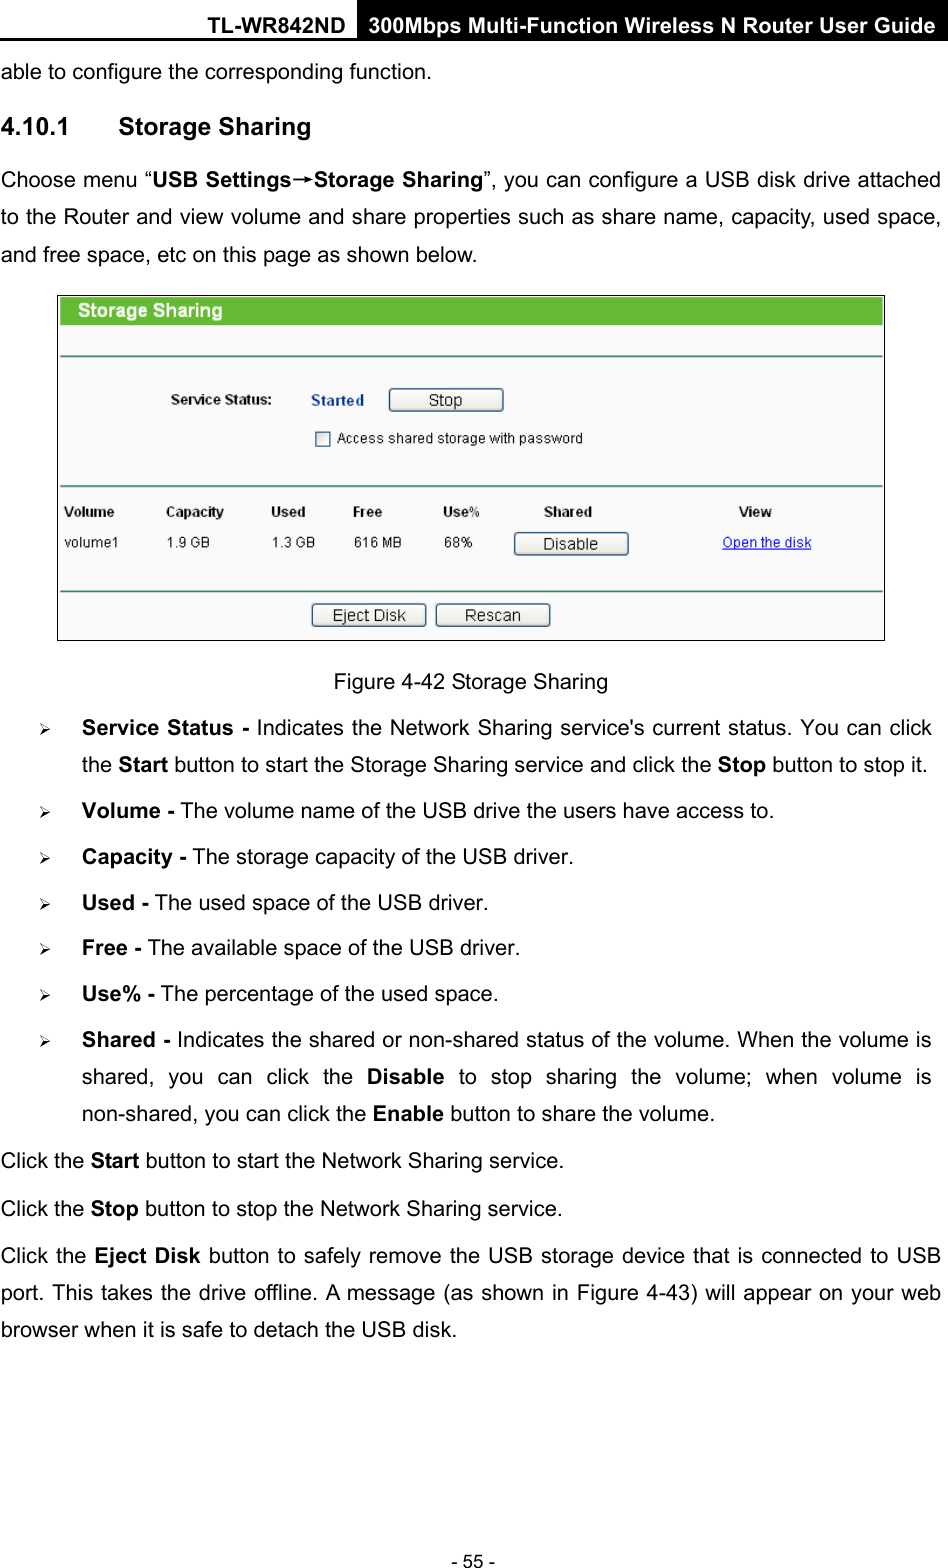 TL-WR842ND 300Mbps Multi-Function Wireless N Router User Guide  - 55 - able to configure the corresponding function. 4.10.1 Storage Sharing Choose menu “USB Settings→Storage Sharing”, you can configure a USB disk drive attached to the Router and view volume and share properties such as share name, capacity, used space, and free space, etc on this page as shown below.  Figure 4-42 Storage Sharing  Service Status - Indicates the Network Sharing service&apos;s current status. You can click the Start button to start the Storage Sharing service and click the Stop button to stop it.    Volume - The volume name of the USB drive the users have access to.    Capacity - The storage capacity of the USB driver.    Used - The used space of the USB driver.    Free - The available space of the USB driver.    Use% - The percentage of the used space.    Shared - Indicates the shared or non-shared status of the volume. When the volume is shared, you can click the Disable  to  stop sharing the volume; when volume is non-shared, you can click the Enable button to share the volume. Click the Start button to start the Network Sharing service.   Click the Stop button to stop the Network Sharing service.   Click the Eject Disk button to safely remove the USB storage device that is connected to USB port. This takes the drive offline. A message (as shown in Figure 4-43) will appear on your web browser when it is safe to detach the USB disk.   